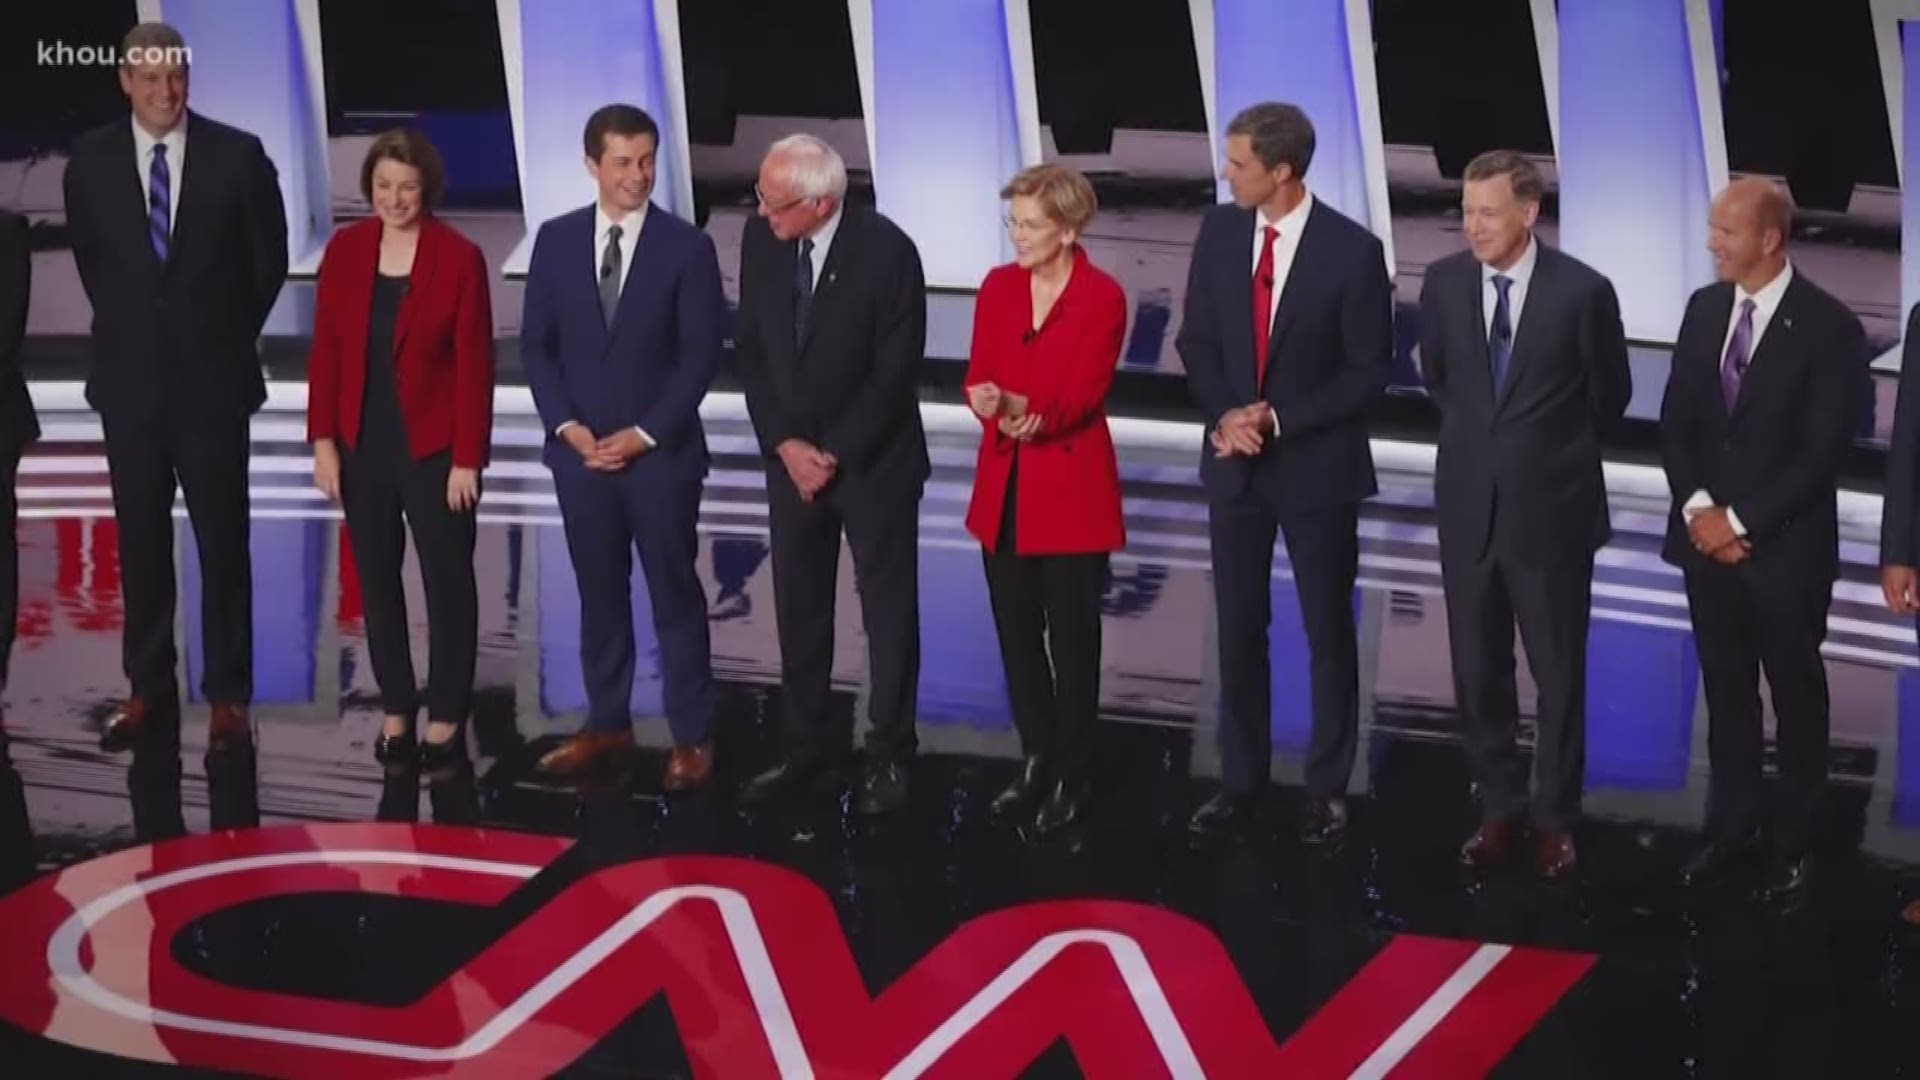 Our VERIFY team fact-checked what the candidates said during the Democratic debate in Ohio.